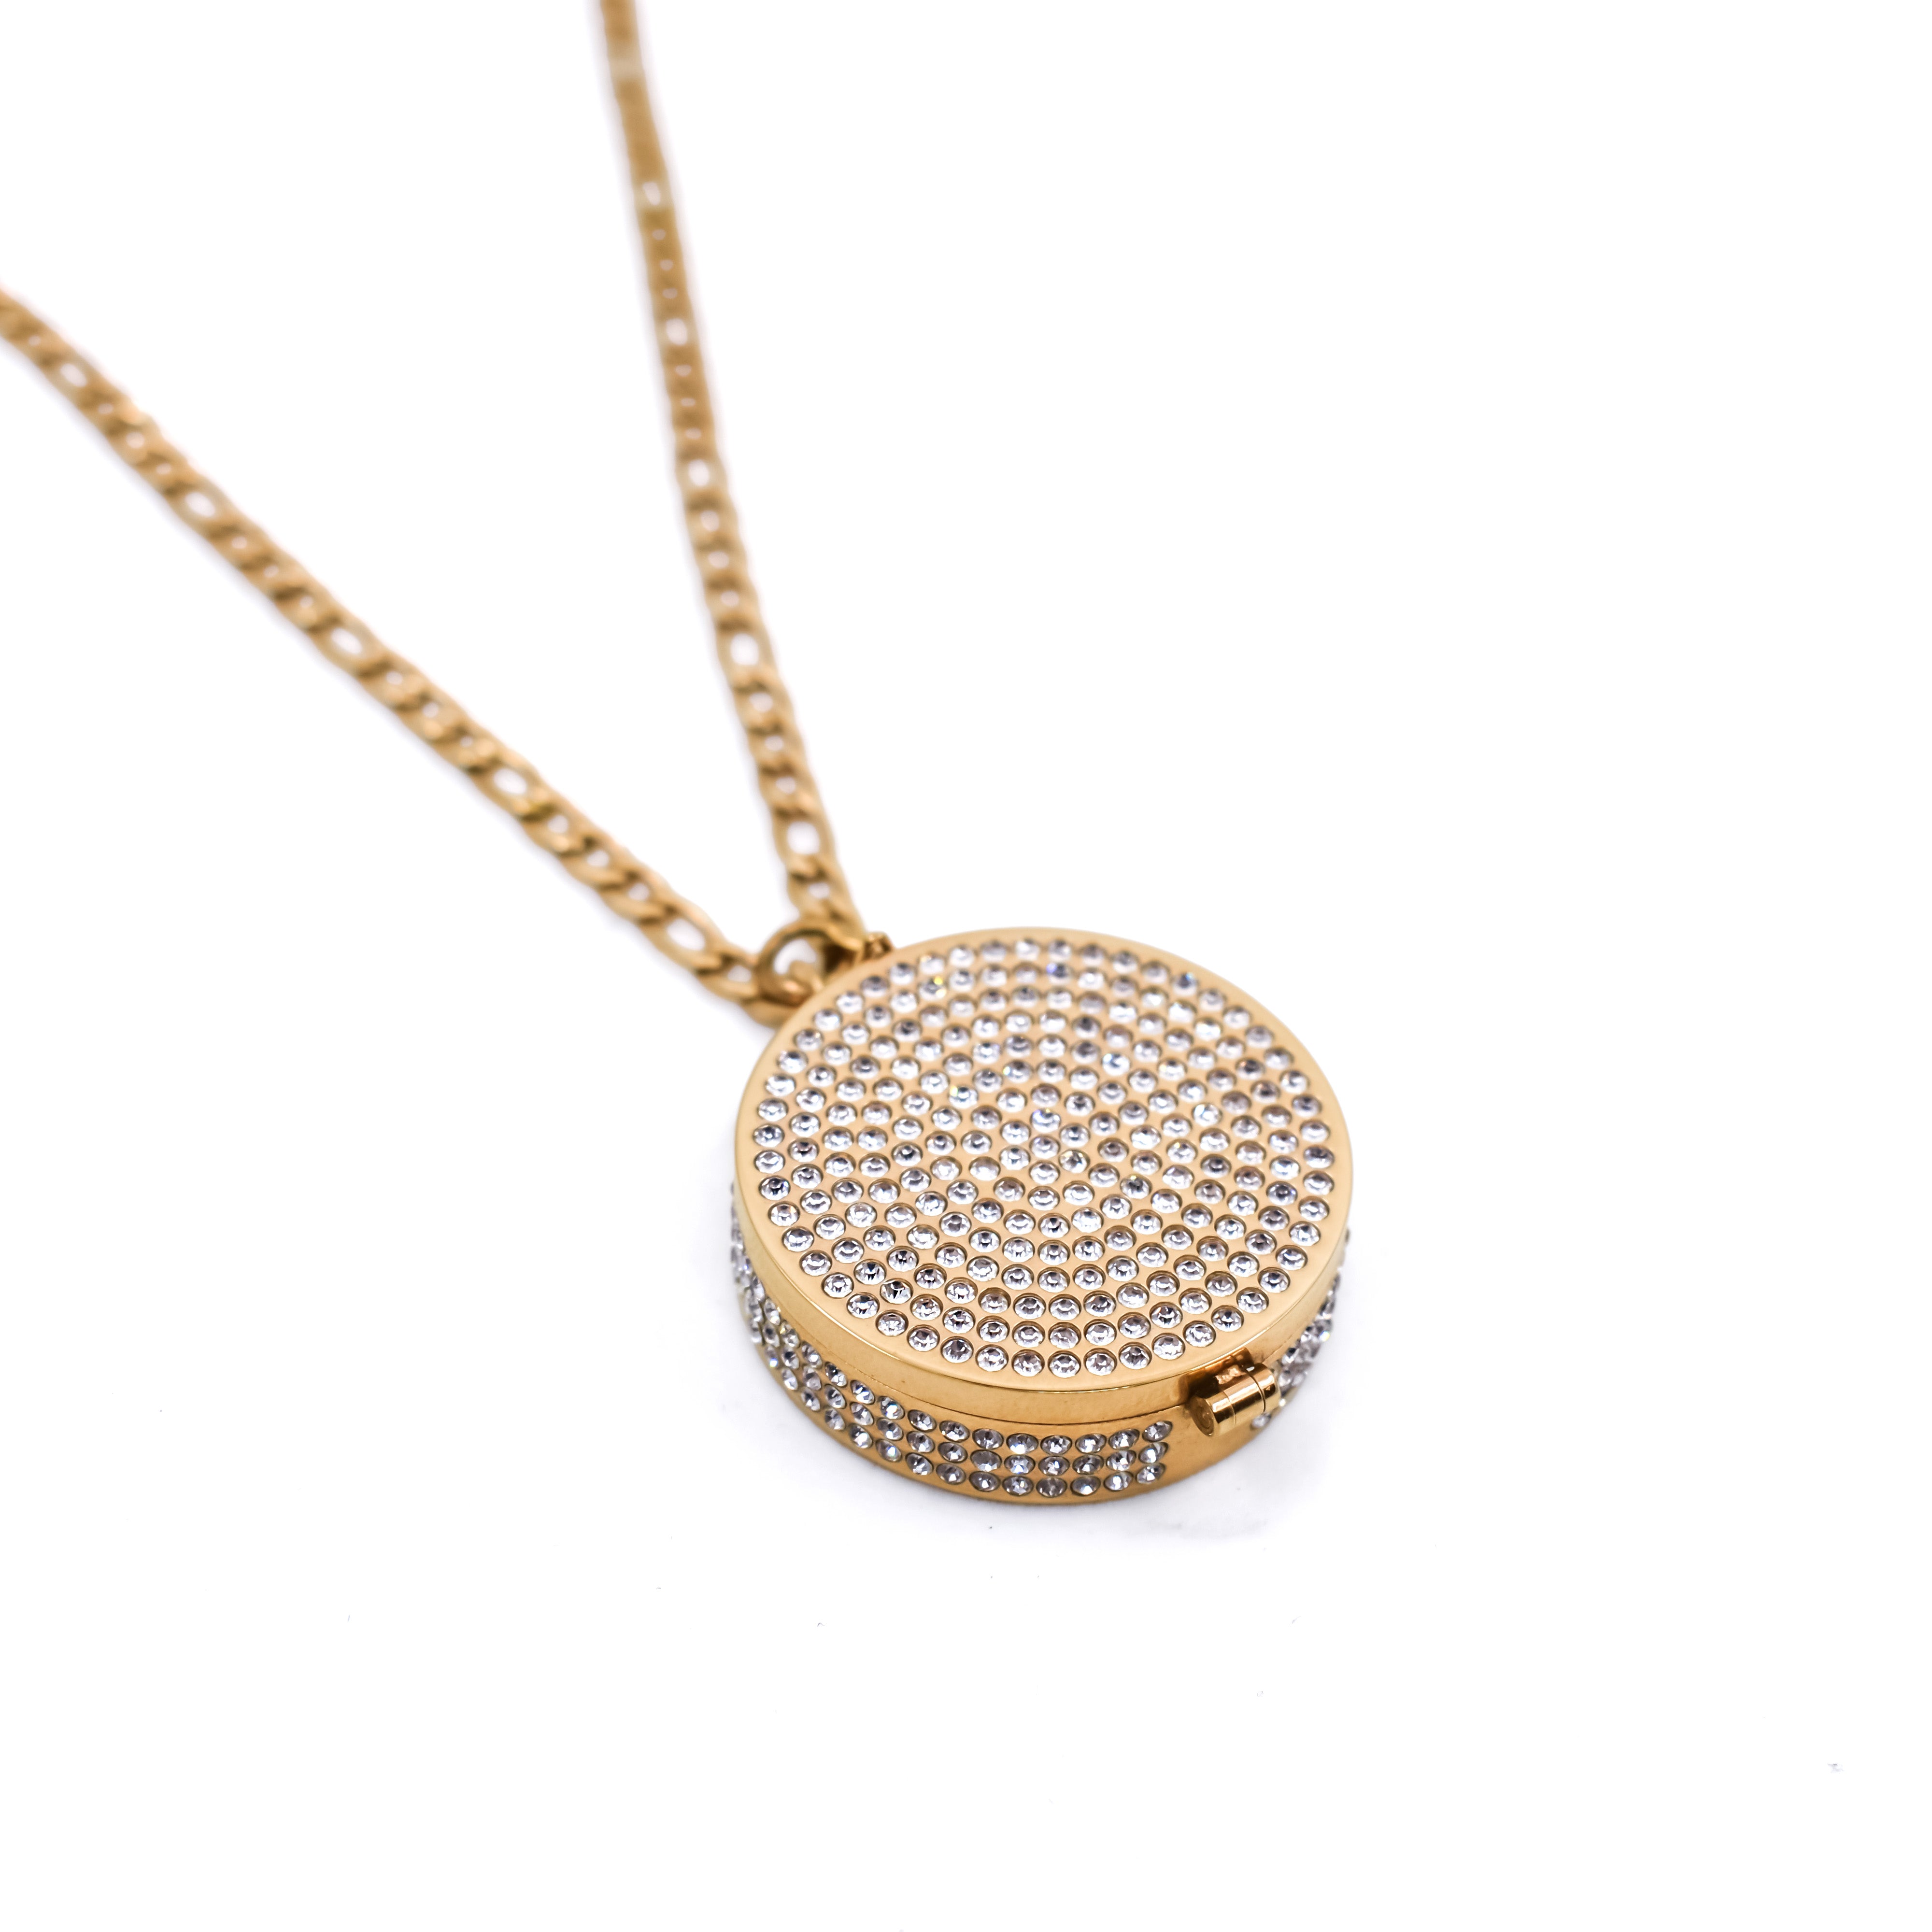 Bling Lip Balm Necklace in 14K Gold - getbalmy